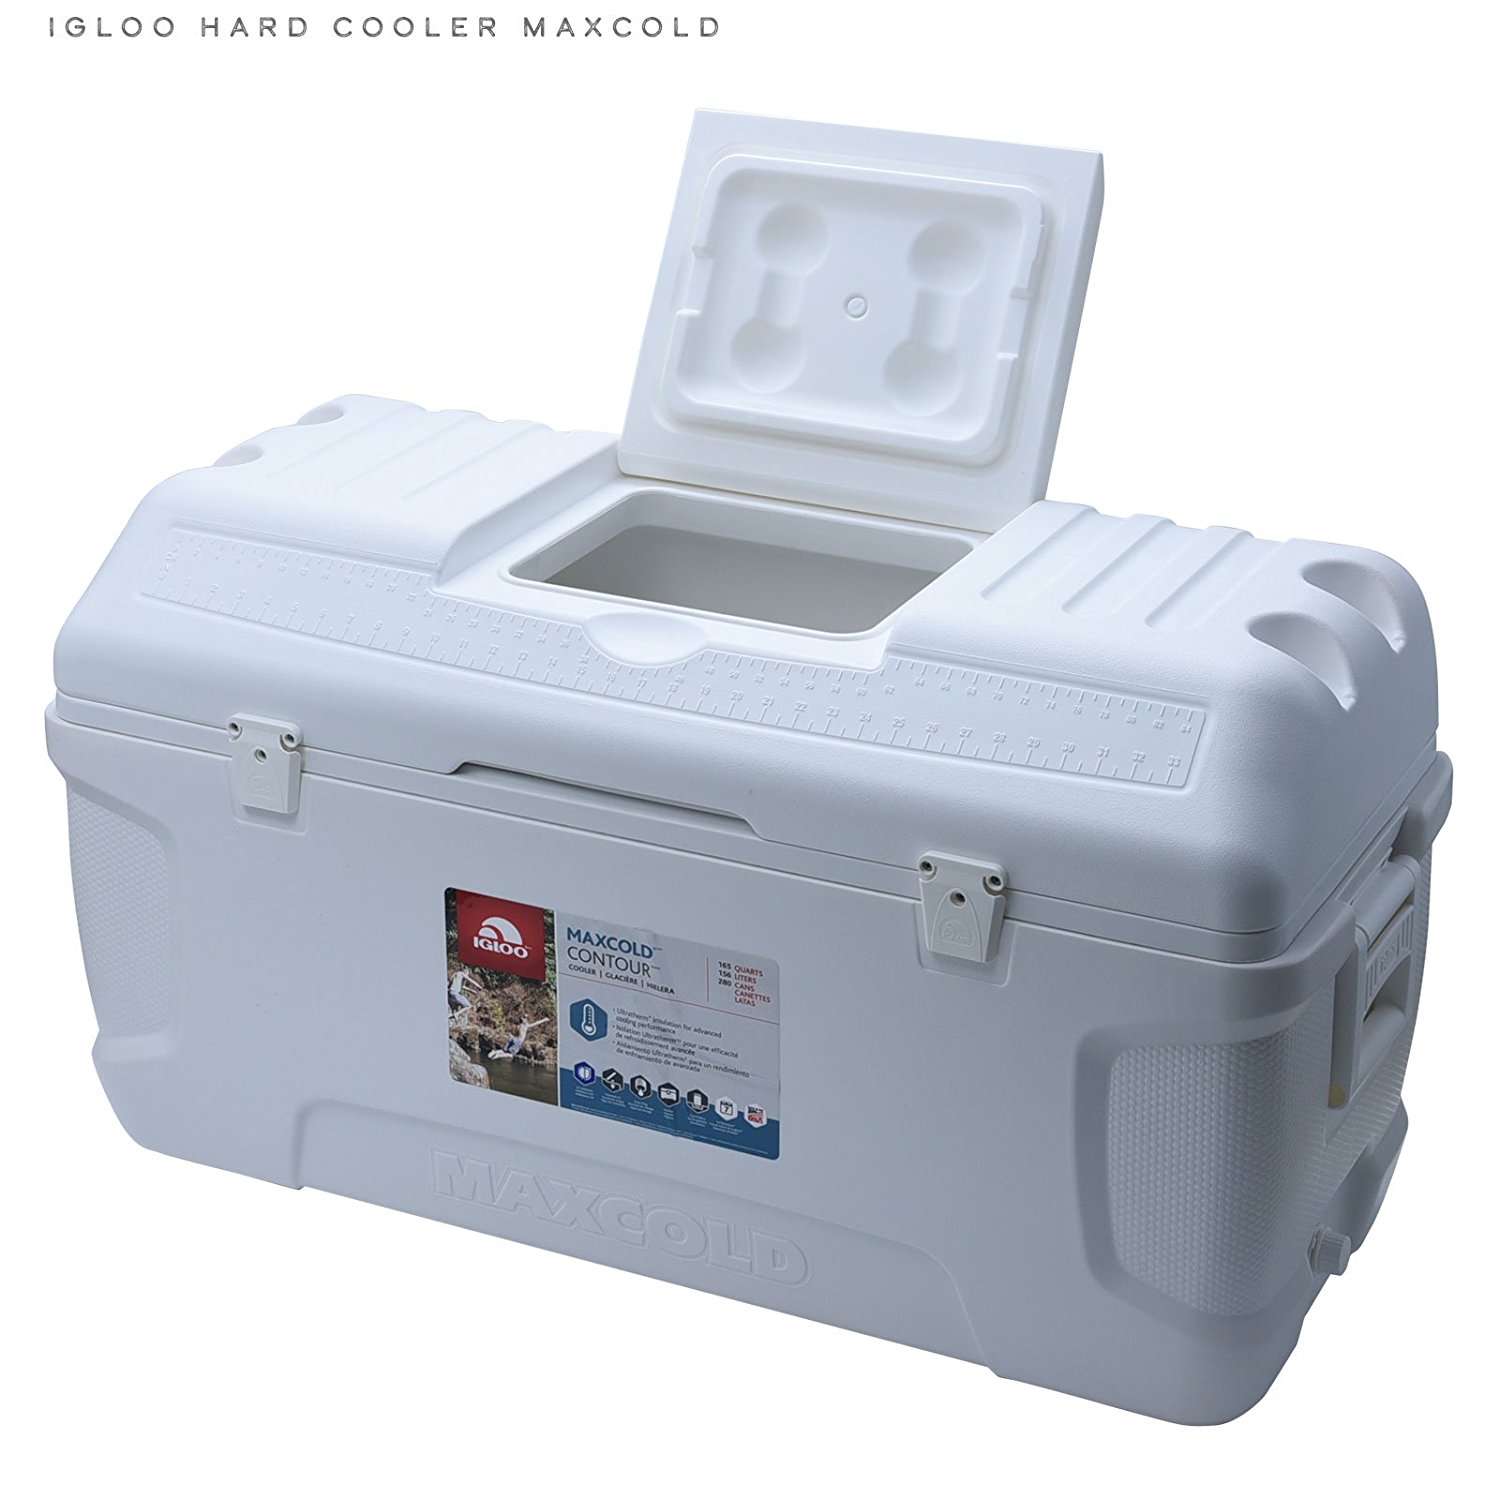 Igloo 49492 Maxcold Cooler 50 Quart for sale online